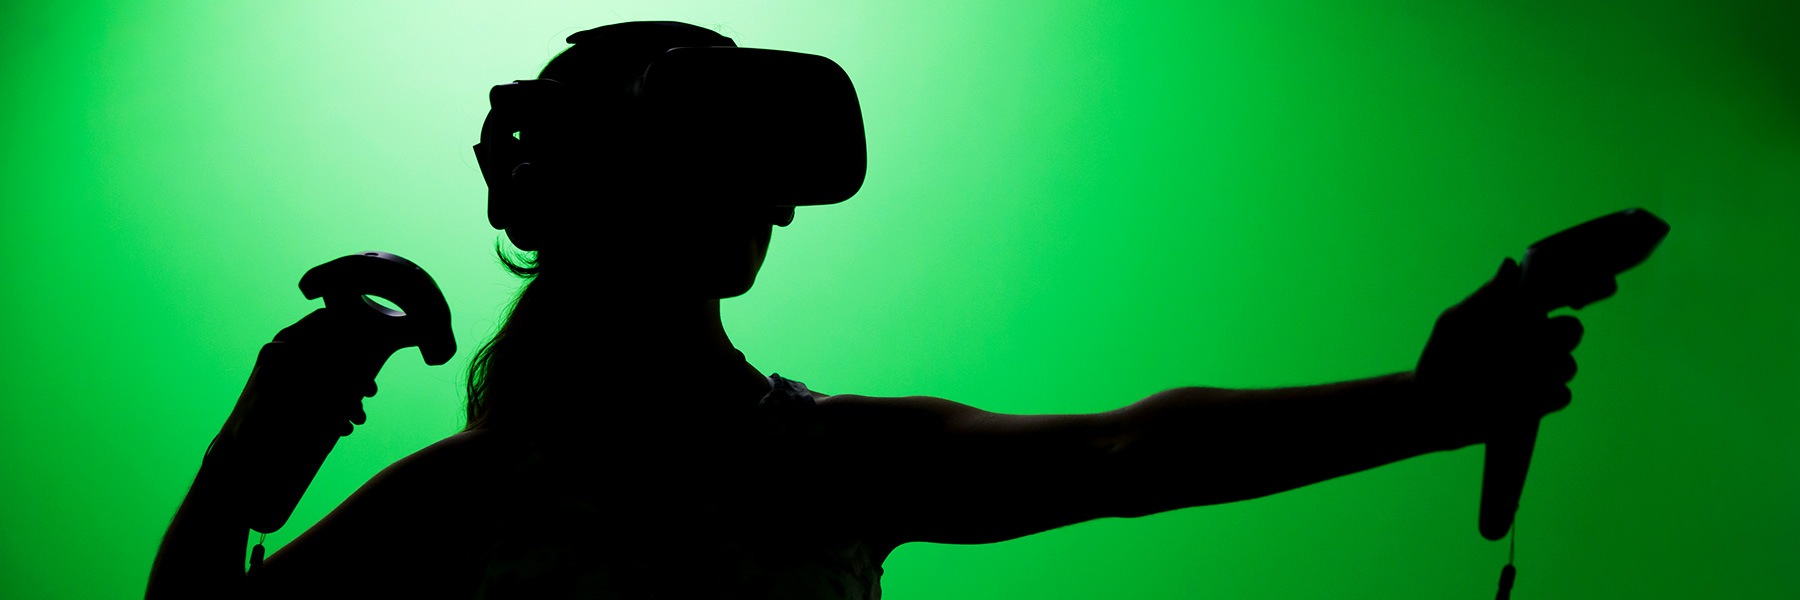 A silhouette of a person with a virtual reality headset and a controller in front of a green screen